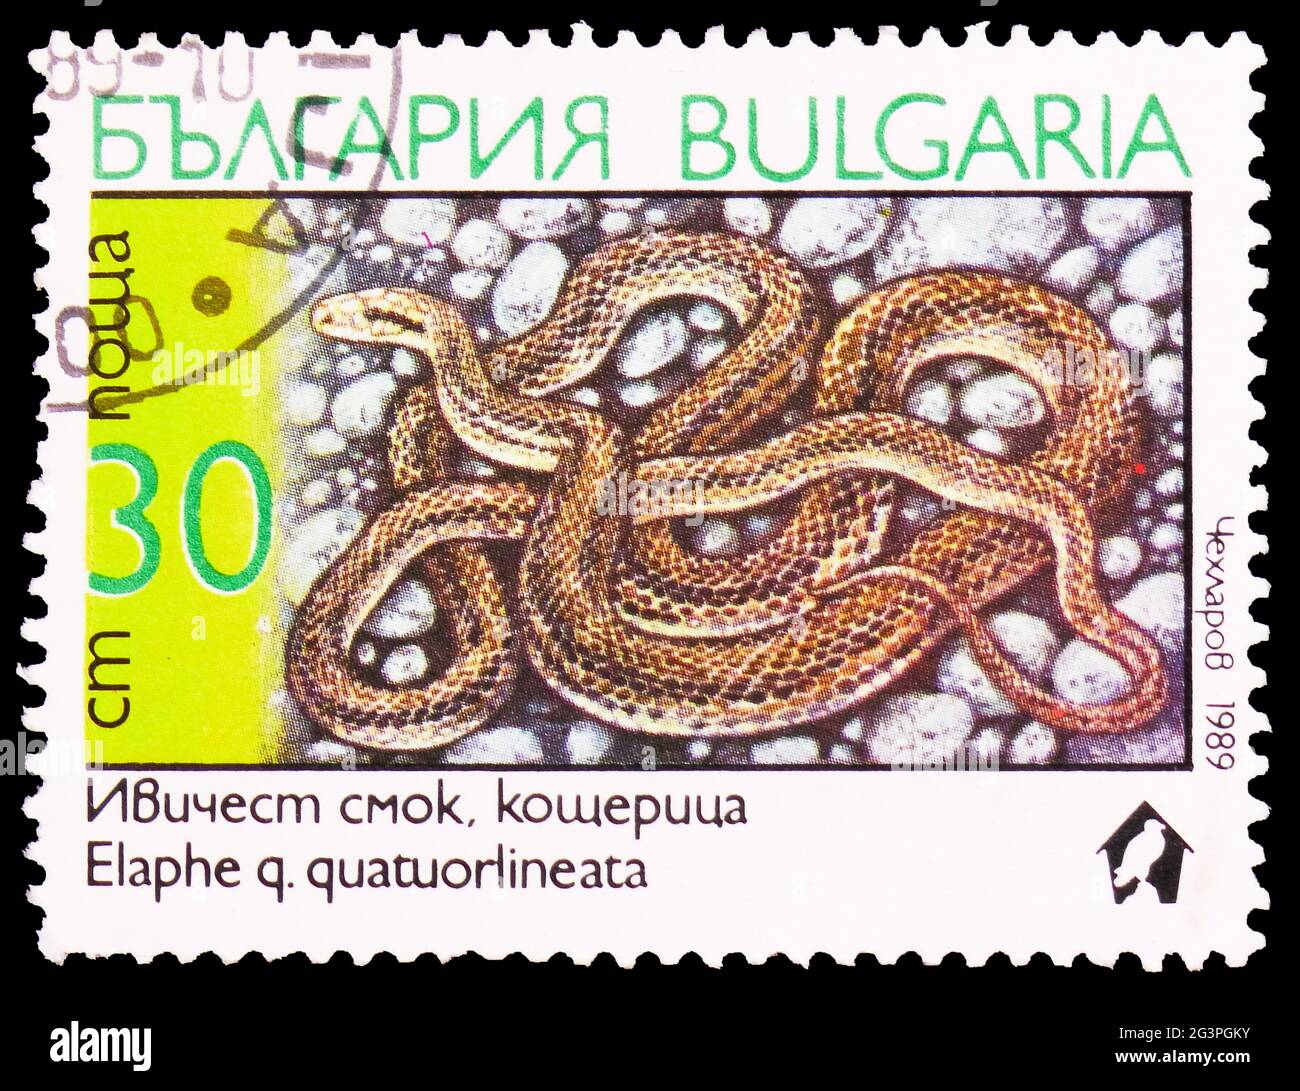 MOSCOW, RUSSIA - MARCH 22, 2020: Postage stamp printed in Bulgaria shows Four-lined Snake (Elaphe quatuorlineata), Snakes serie, circa 1989 Stock Photo